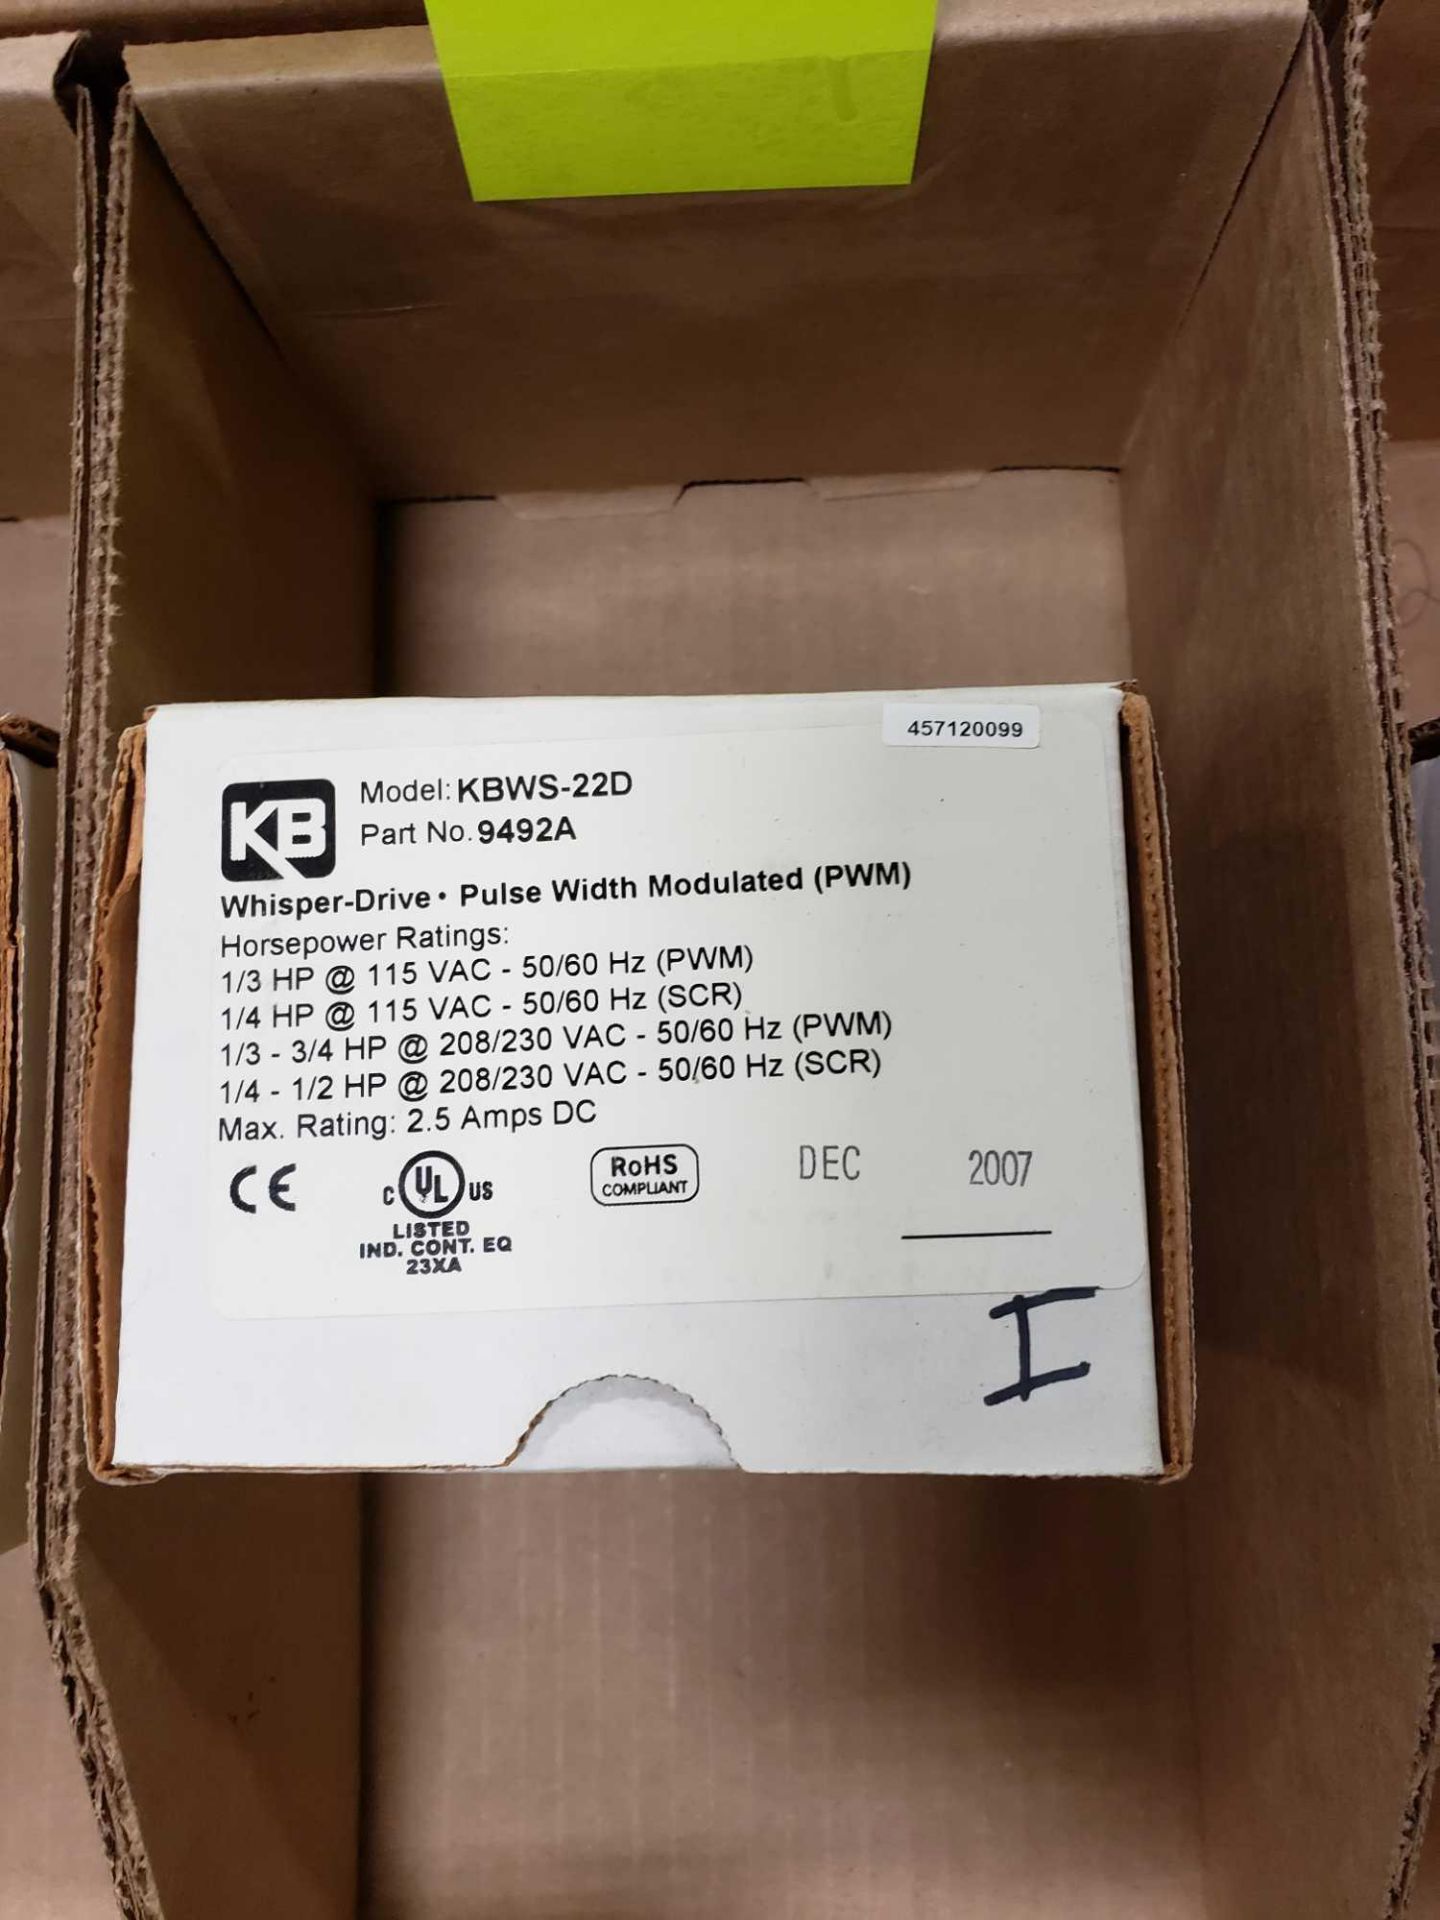 KB Electronics whisper drive pulse width modulated model KBWS-22D, part 9492A. New in box. - Image 2 of 2